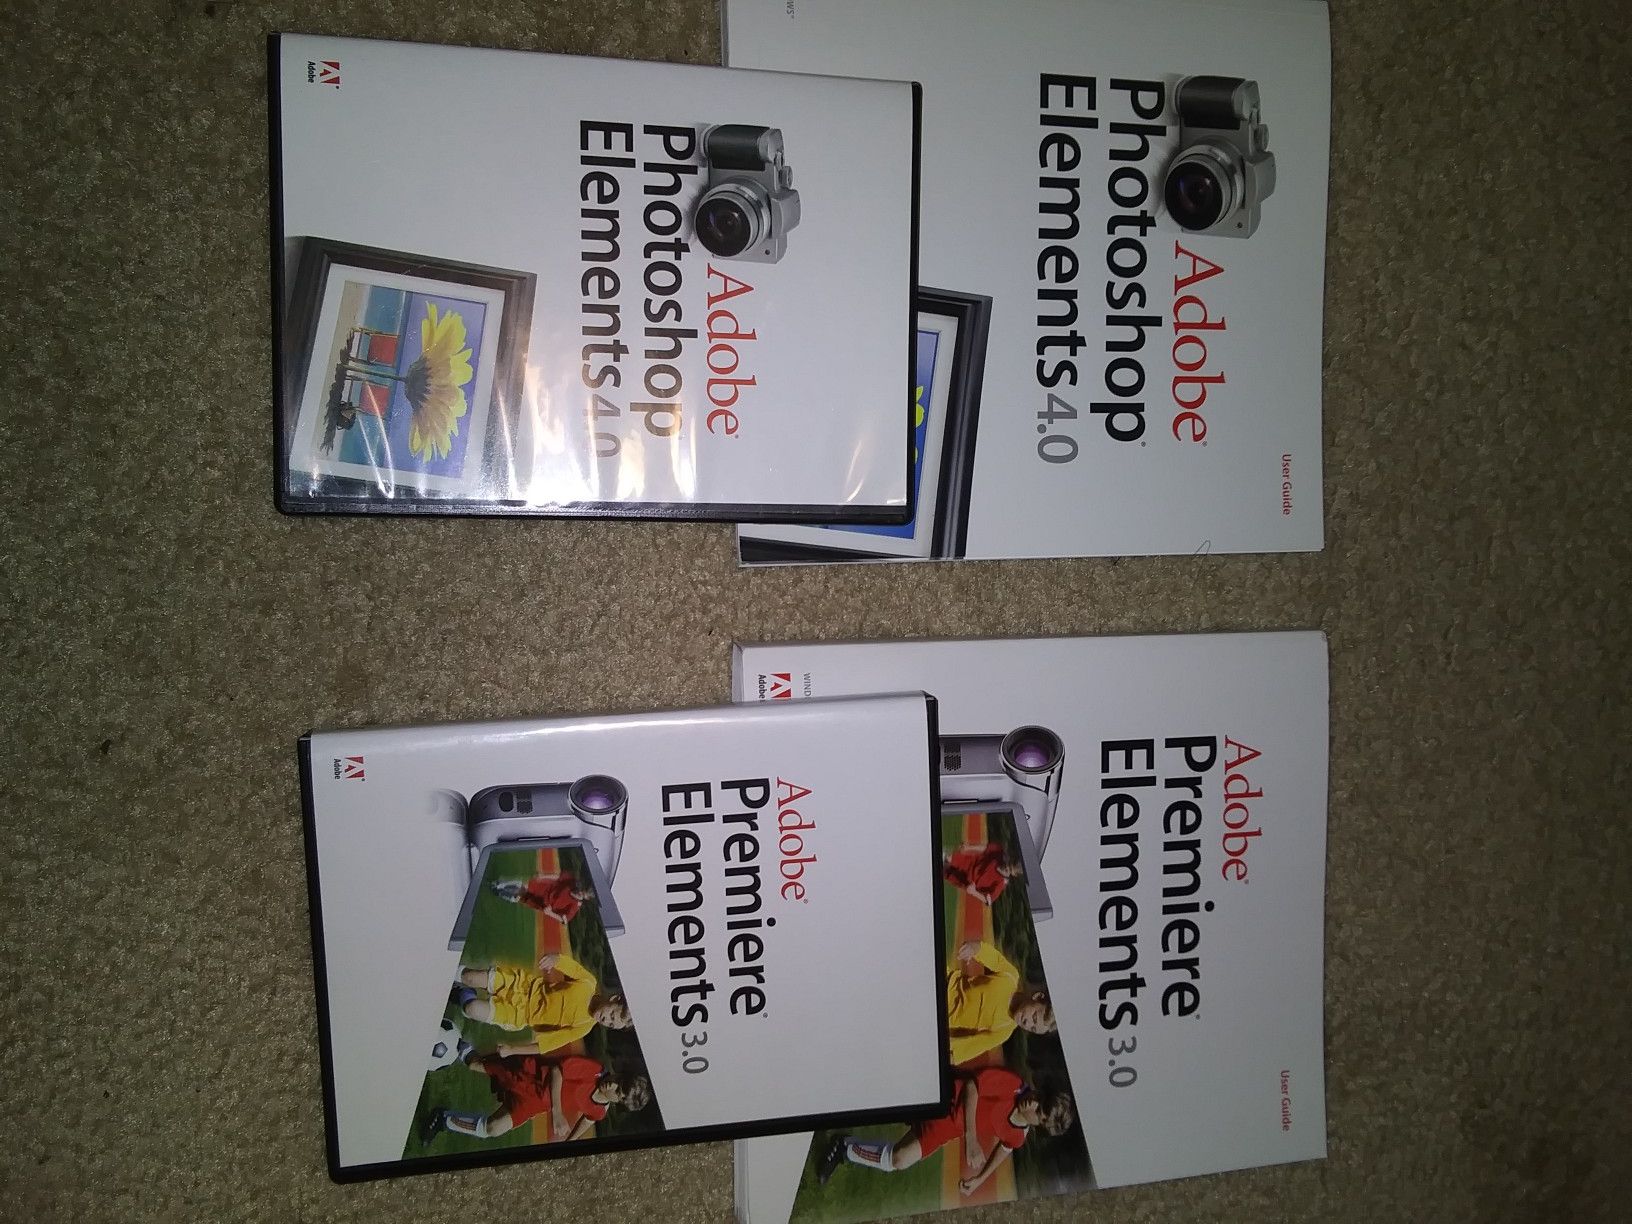 Adobe Photoshop 4.0 & Adobe Premiere Elements 3.0 software with manuals